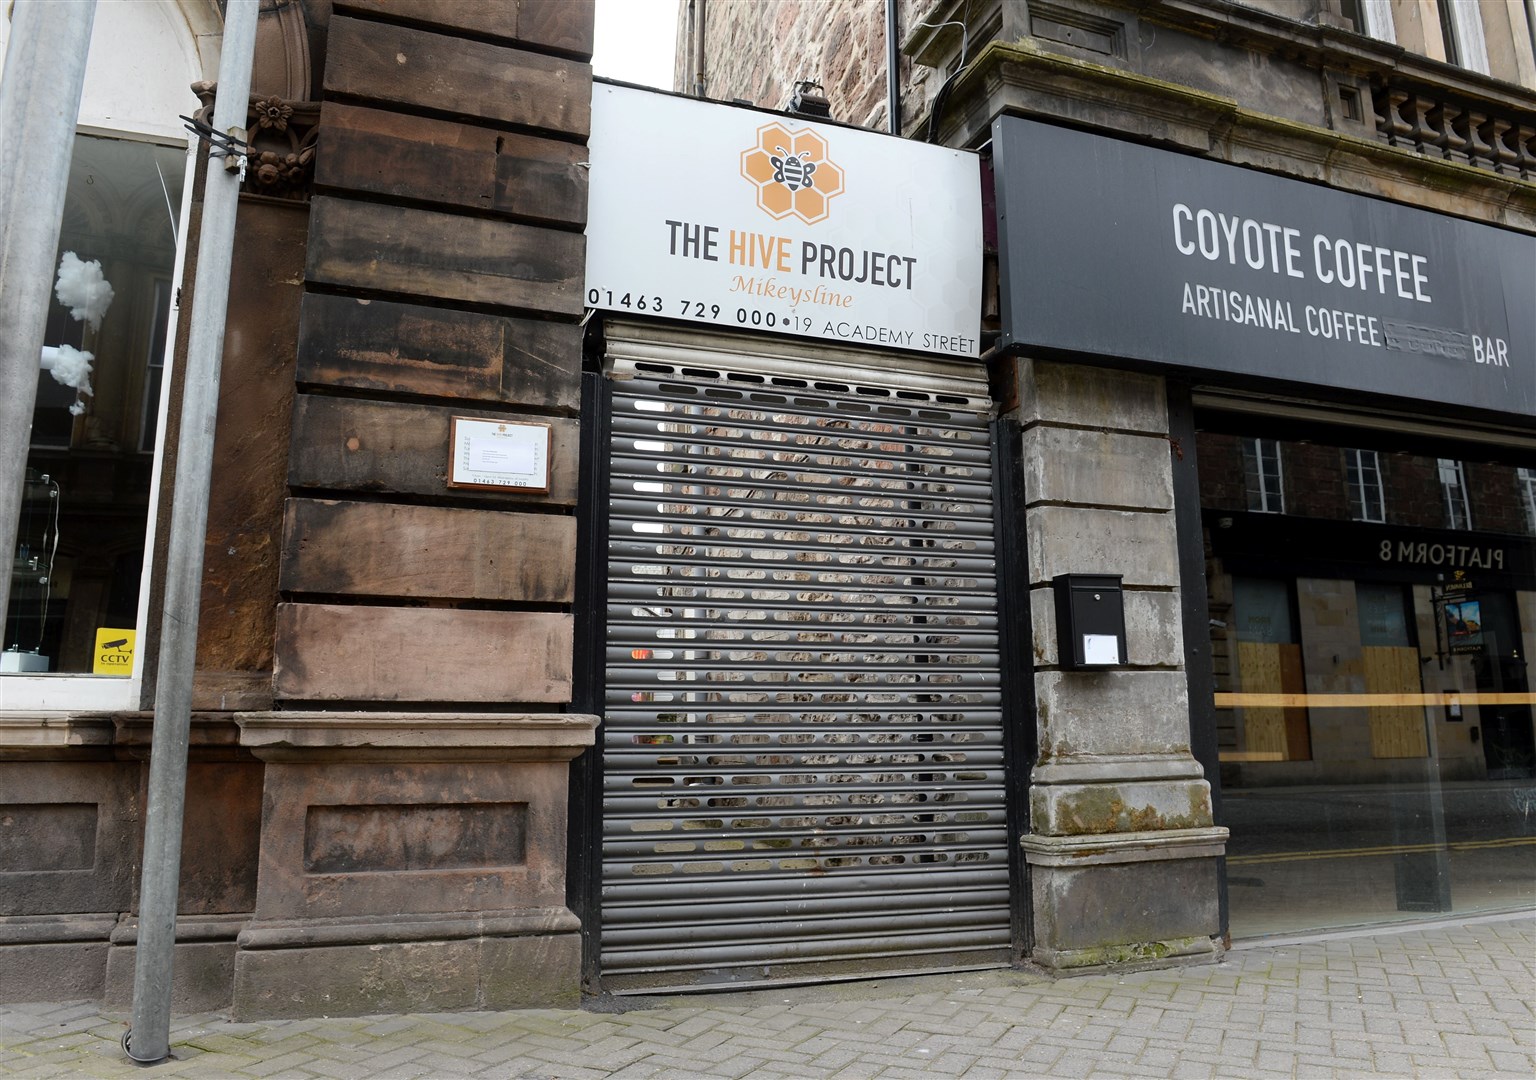 The Hive drop-in centre in Academy Street has been since the start of lockdown.